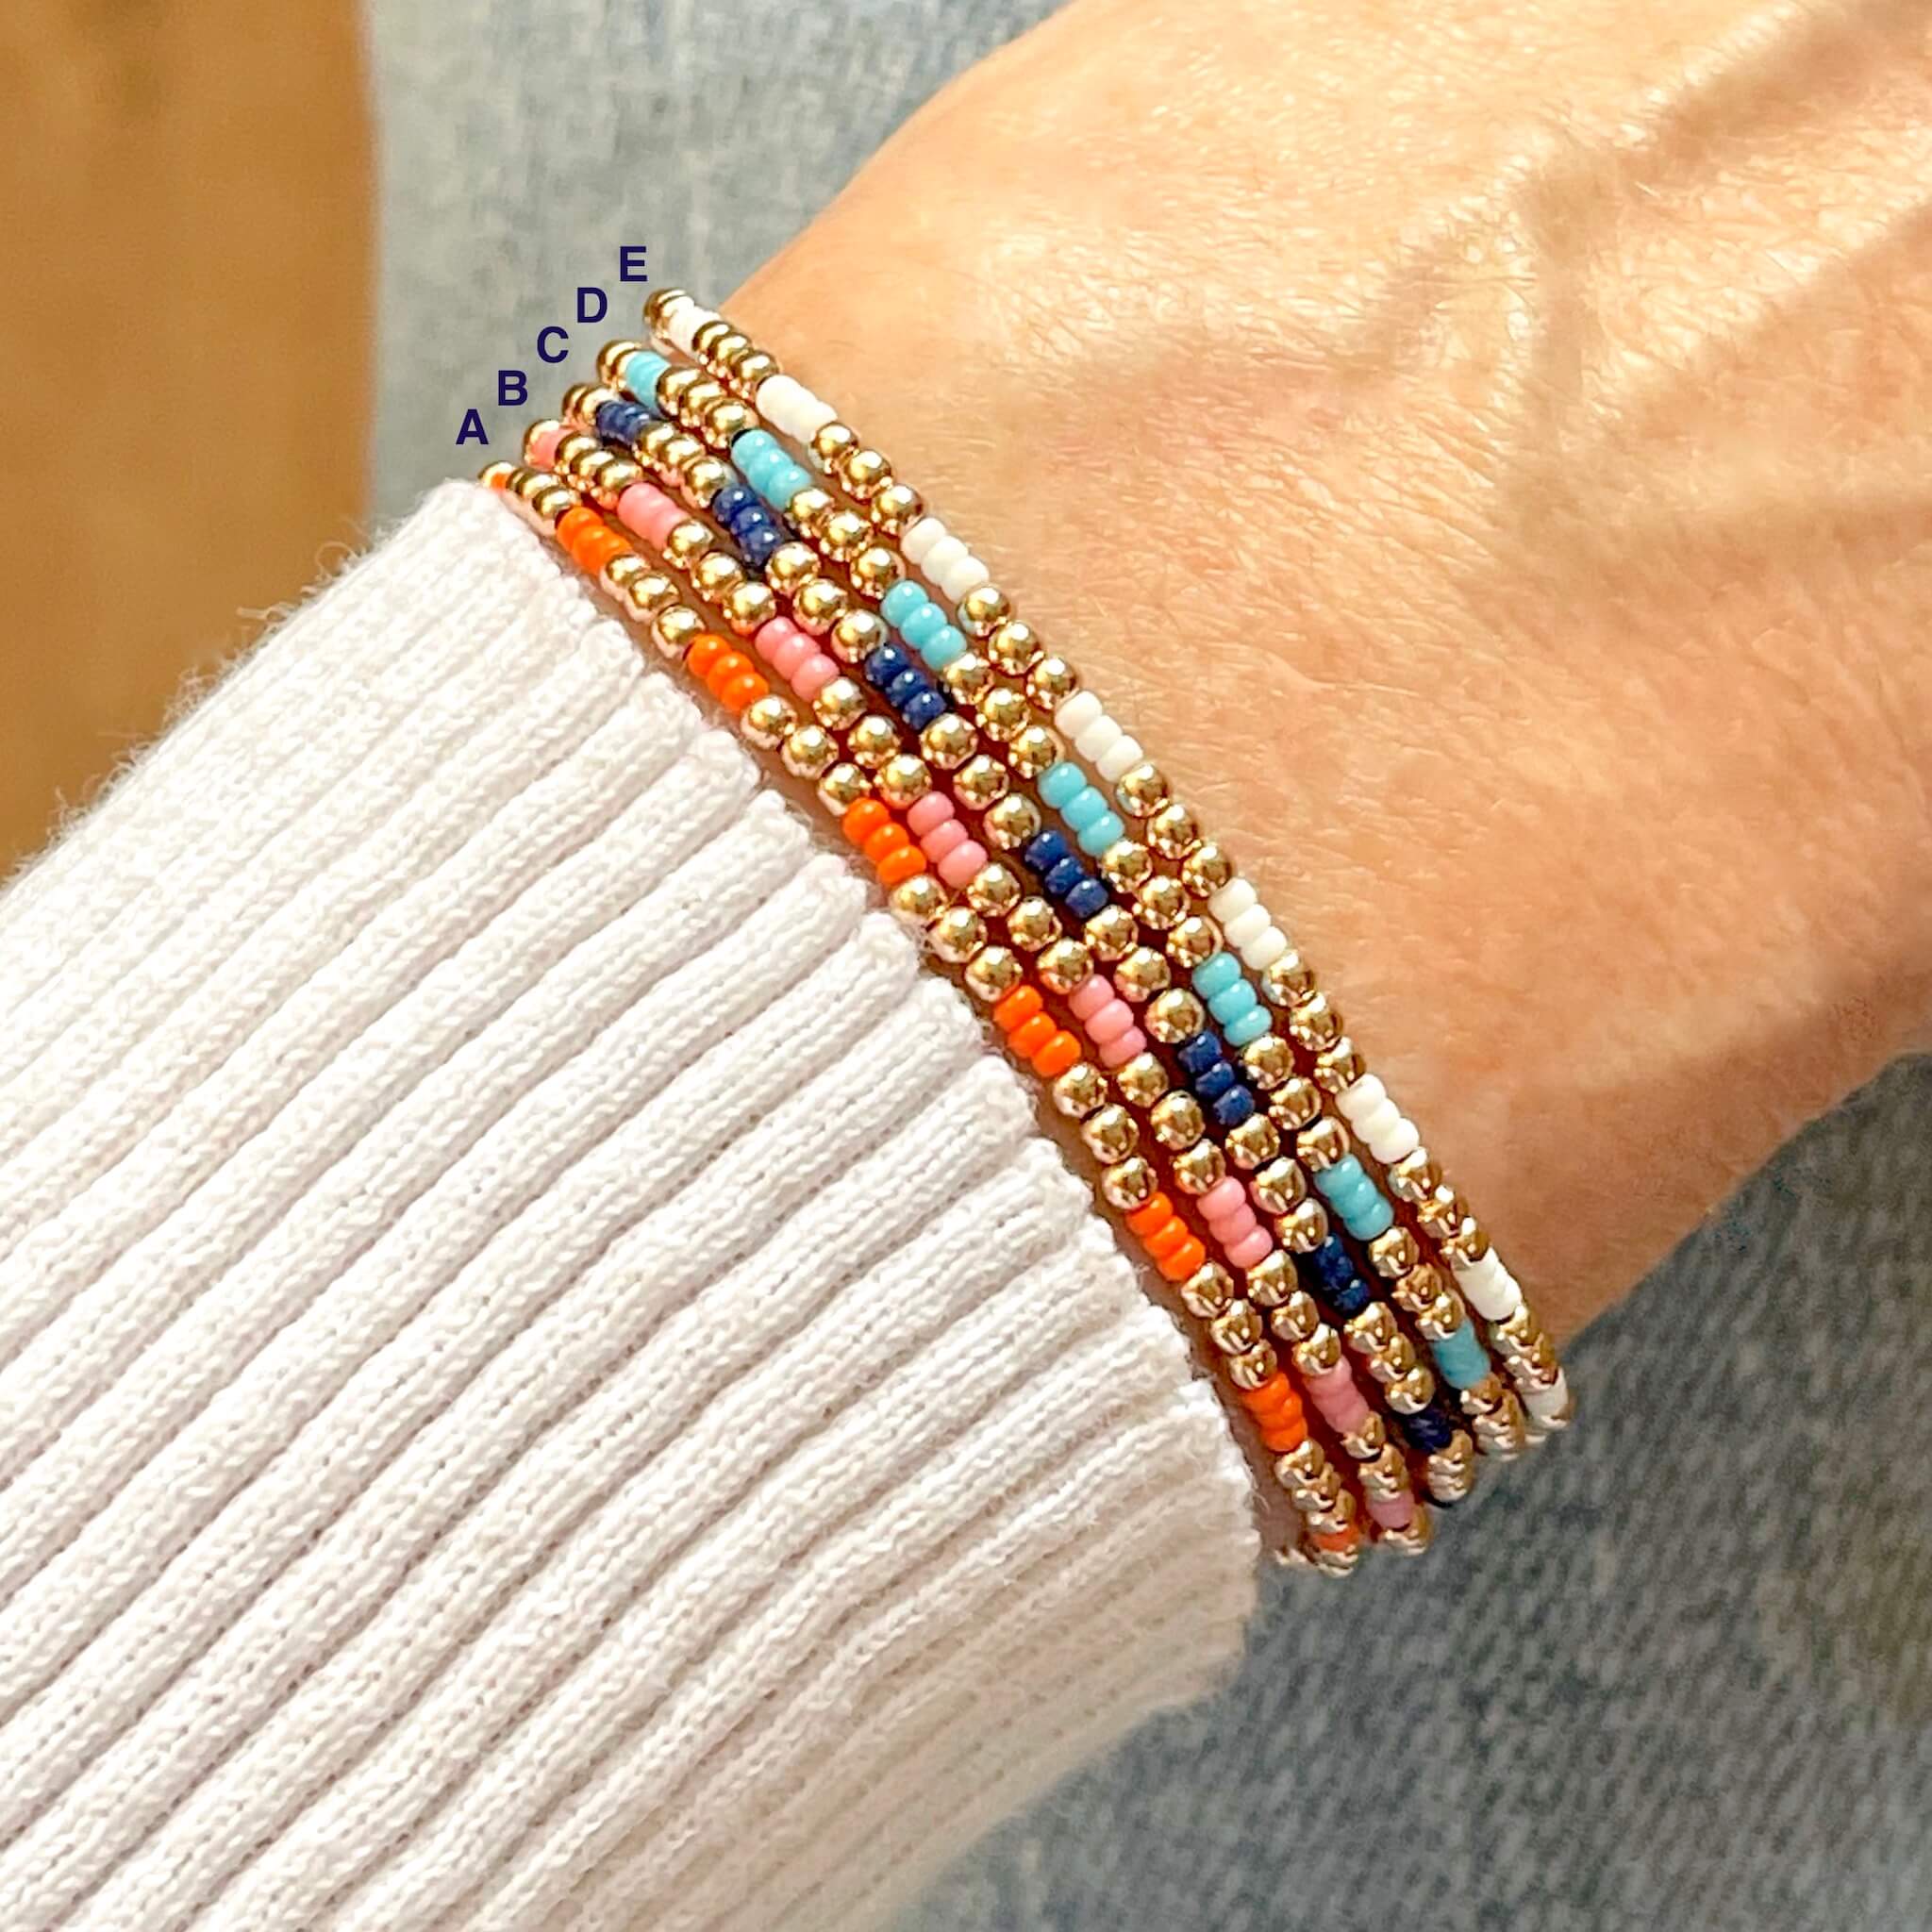 Small Beaded Bracelets | Colorful Round Seed Beads | Gold/Silver Beads C-Navy / Rose Gold / 7.0 (Women's M)